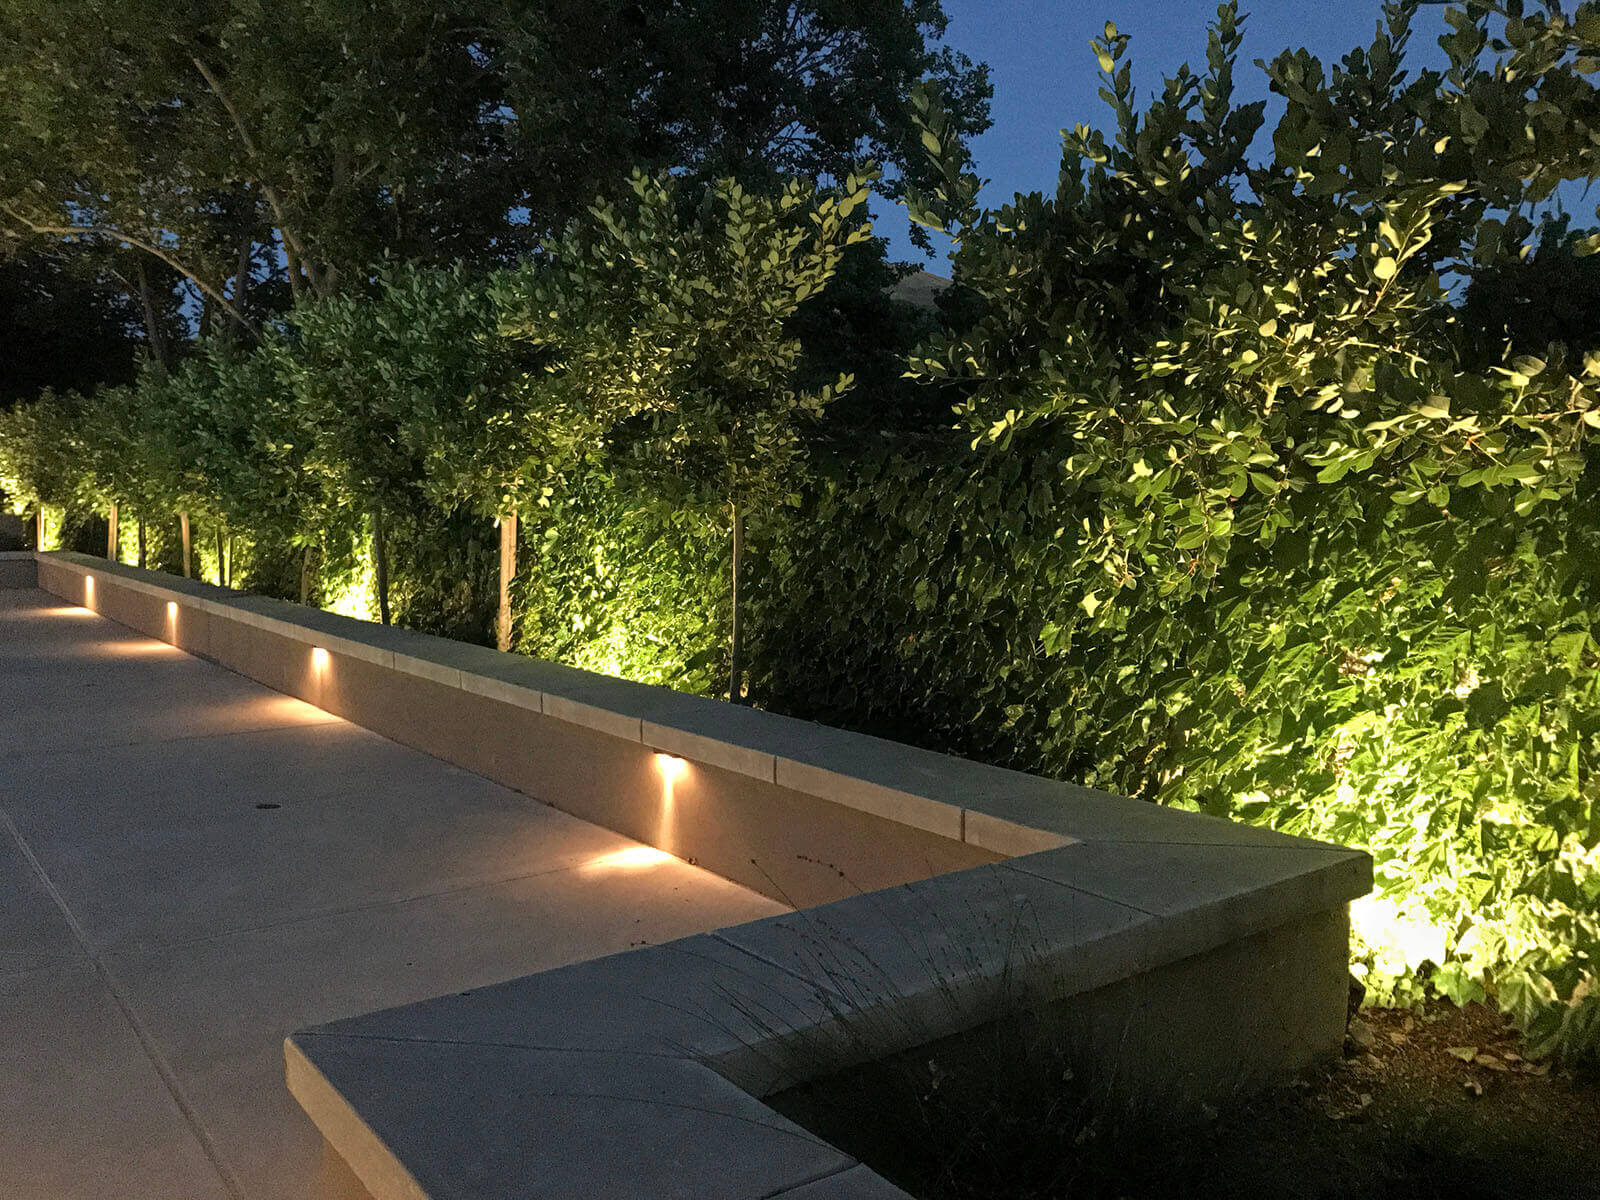 Border stone and concrete seating area with accent lighting on greenery wall and patio floor